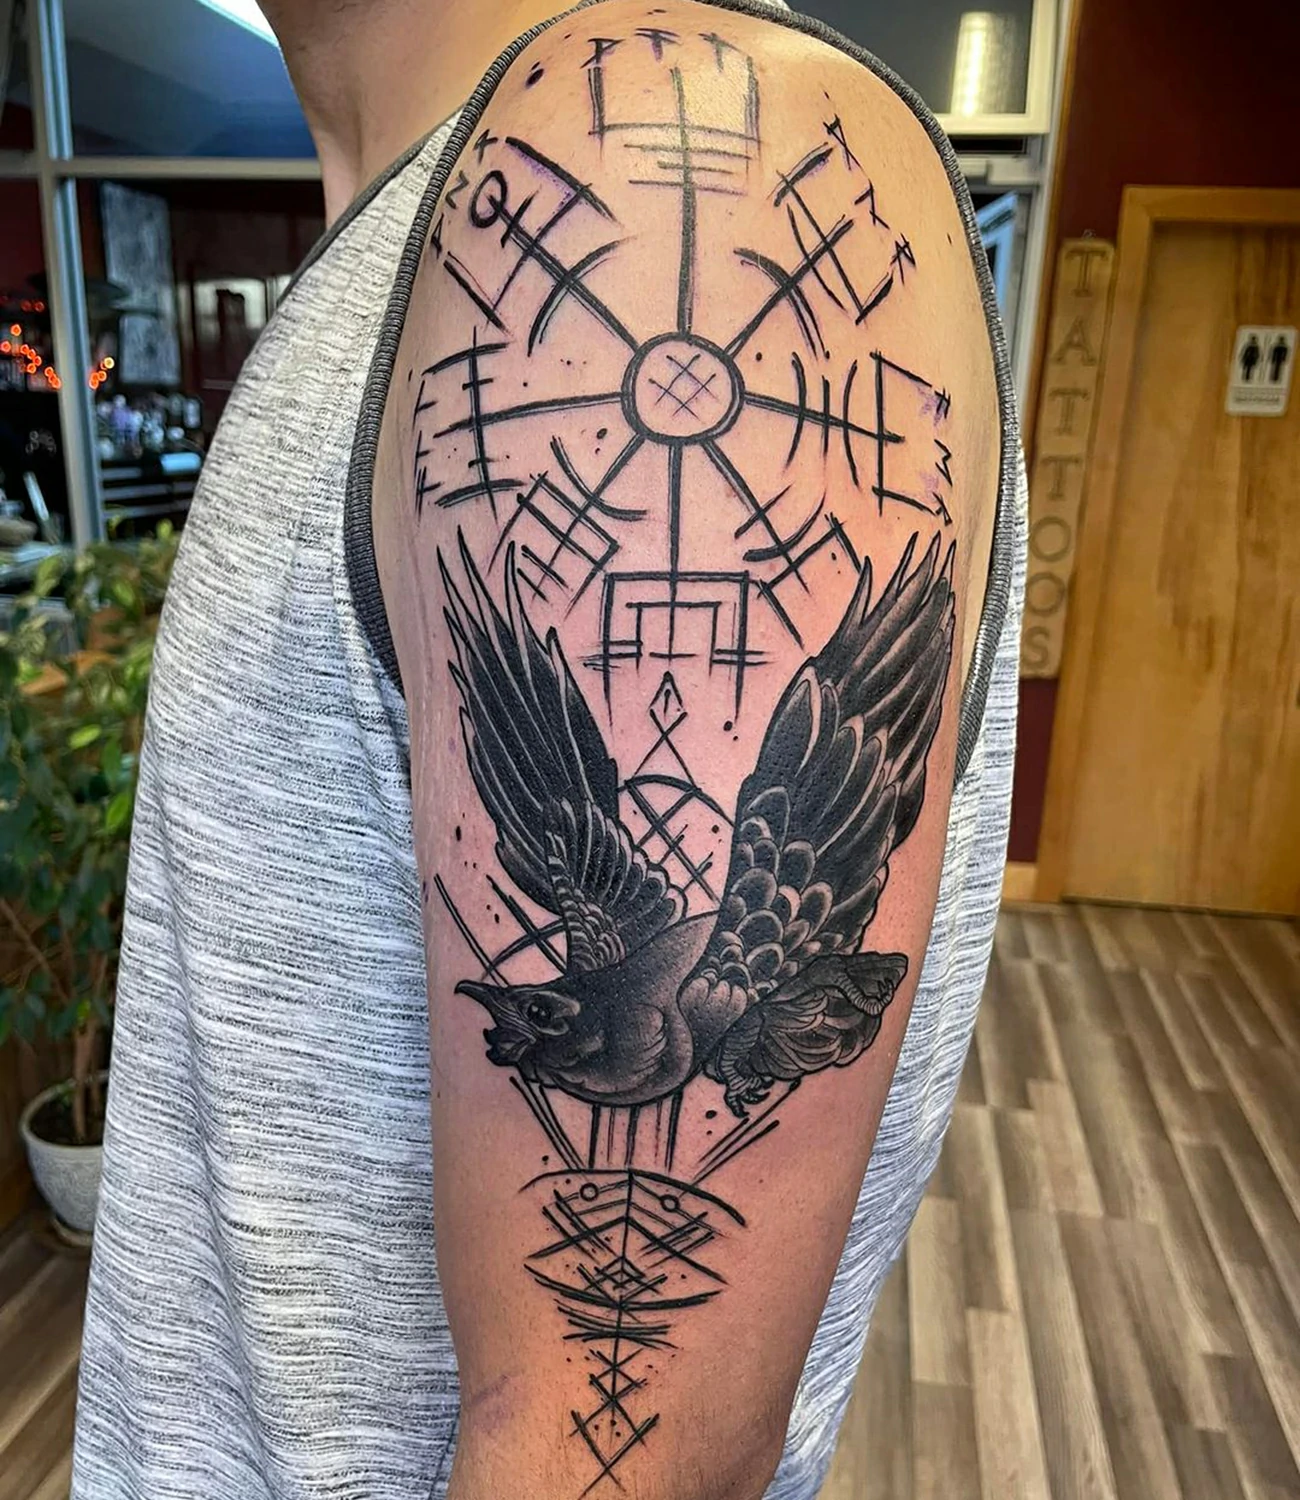 Nordic raven tattoo: A raven tattoo inspired by ancient Nordic designs and mythology.